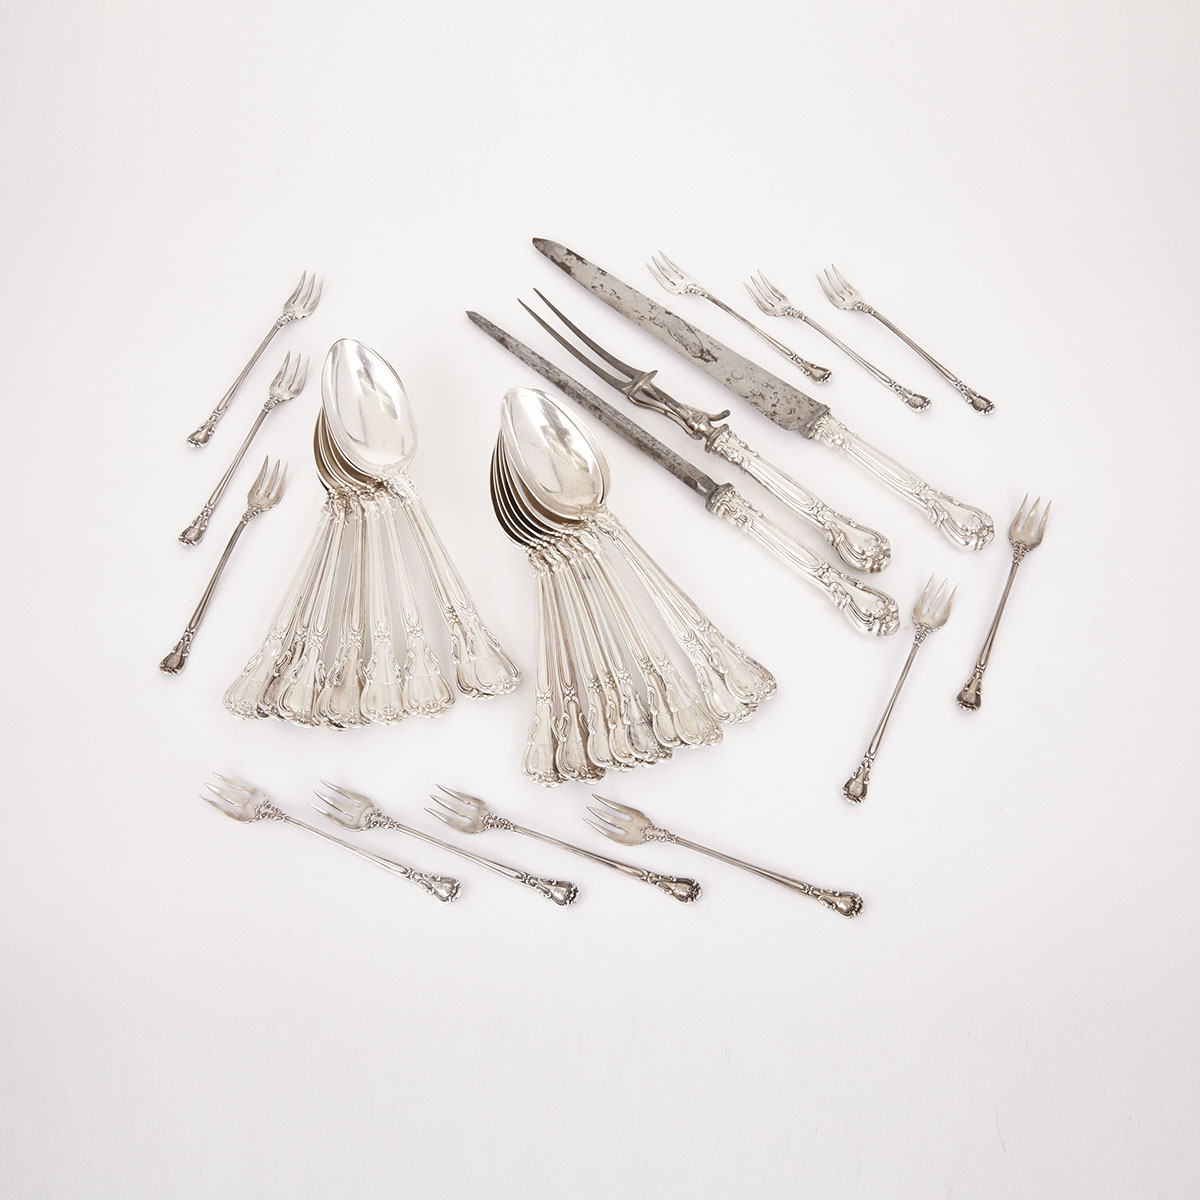 Canadian Silver ‘Chantilly’ Pattern Flatware, Henry Birks & Sons, Montreal, Que., 20th century 